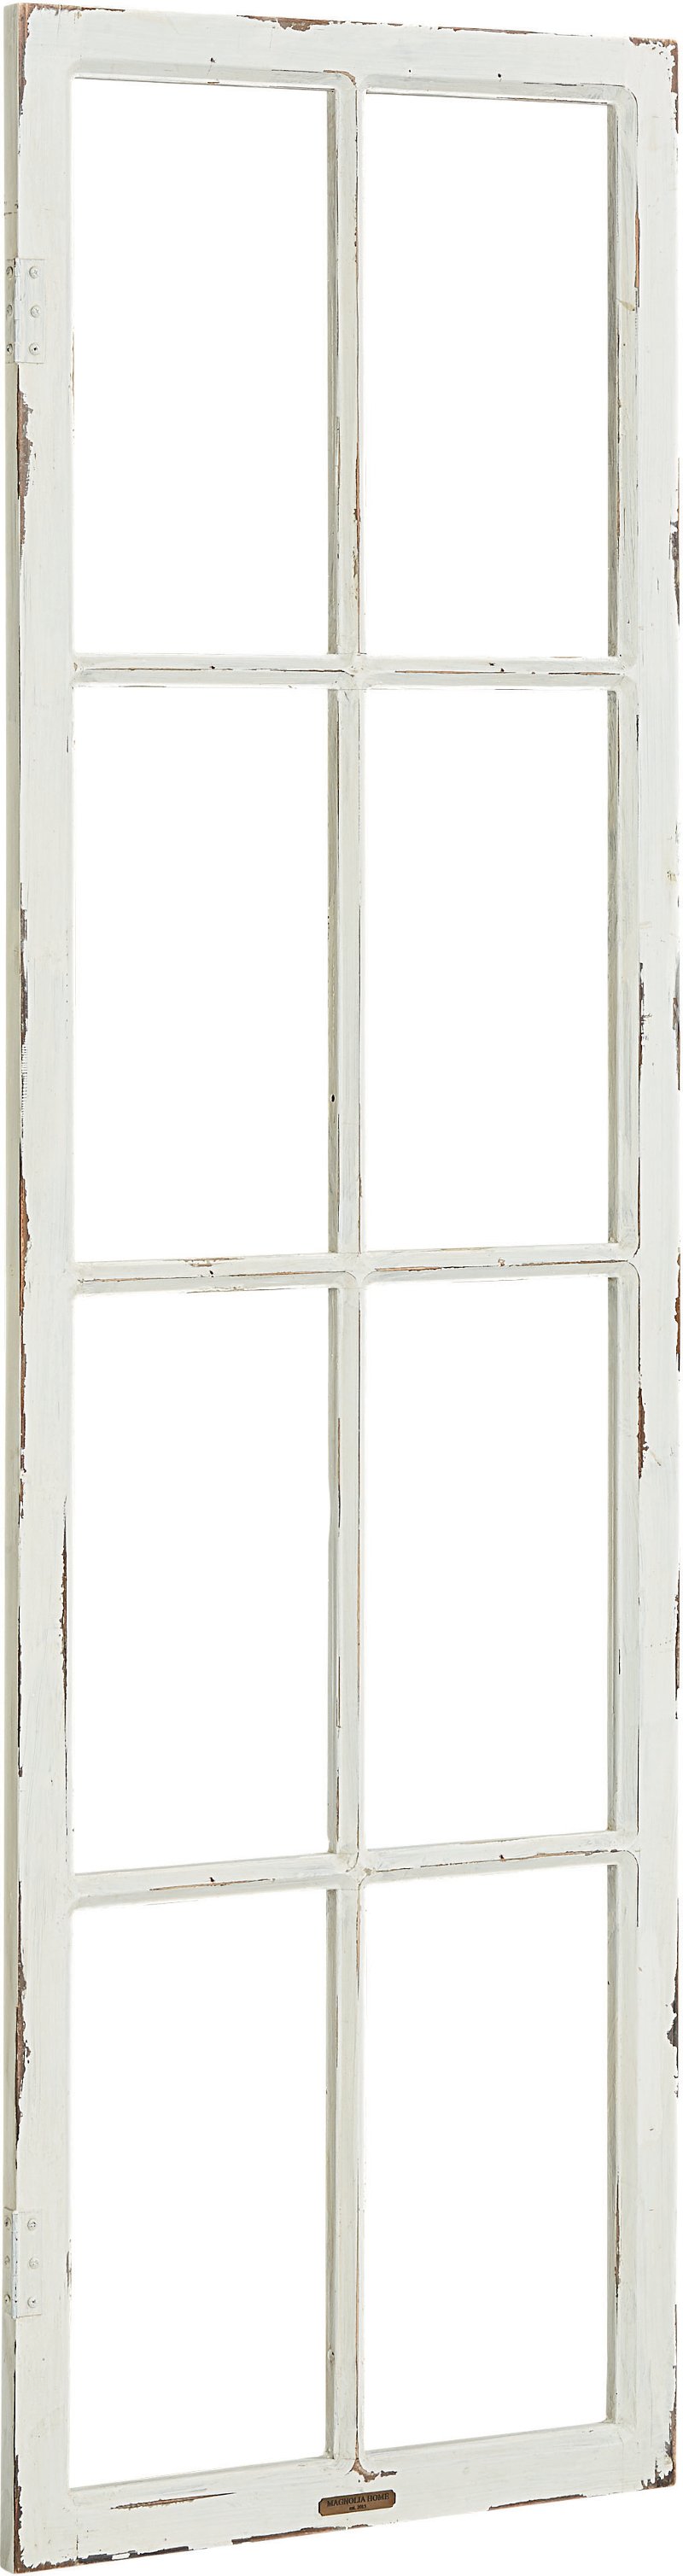 Magnolia Home Furniture Distressed White Wood Window Frame | RC Willey ...